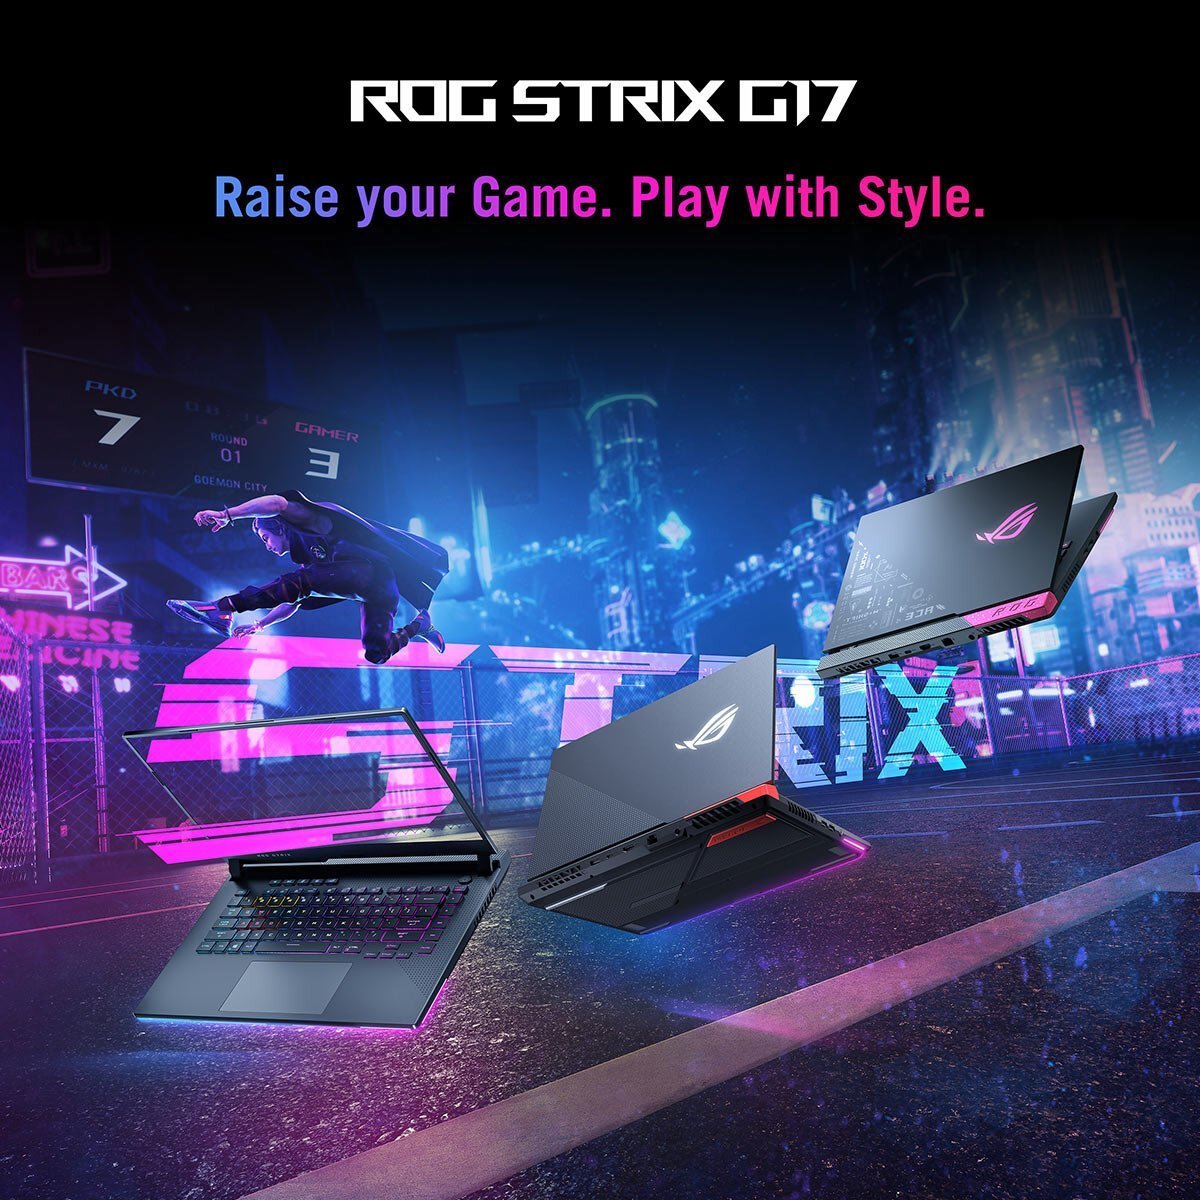 ASUS ROG Strix G17, AMD Ryzen 7, 8GB RAM, 512GB SSD, NVIDIA GeForce GTX 1650, 17.3 Inch Gaming Laptop, G713IH-HX009T with ROG Backpack and ROG Impact Gaming Mouse - Signature Retail Stores